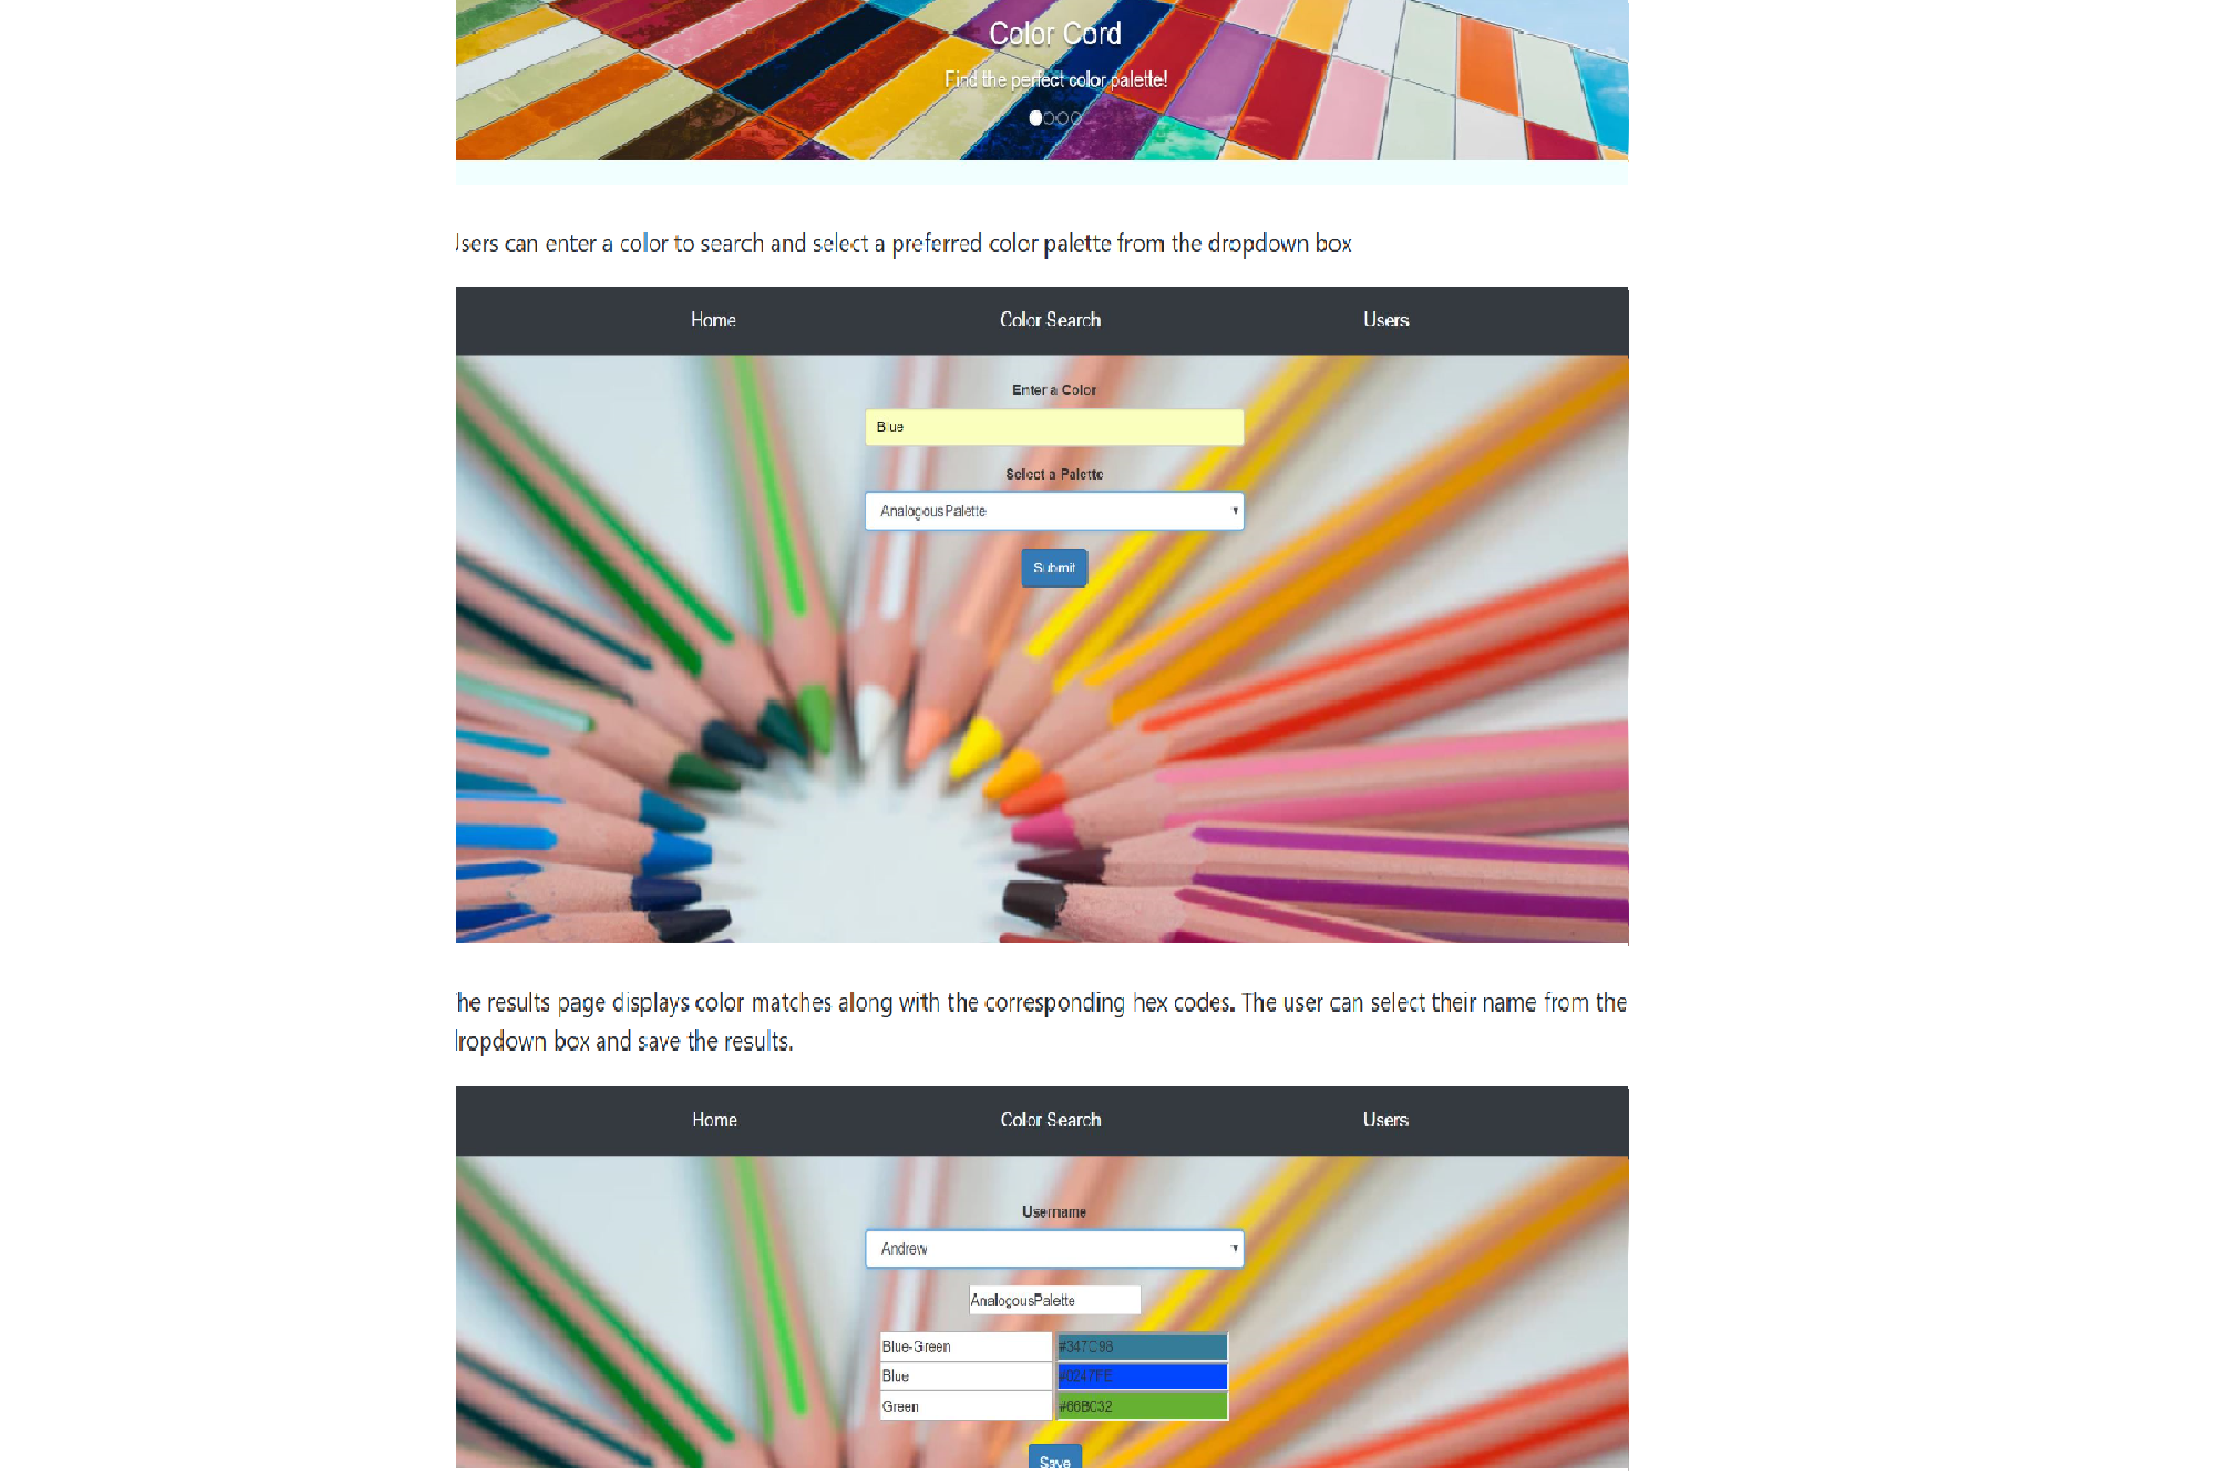 An image and link of color coordination with built API project